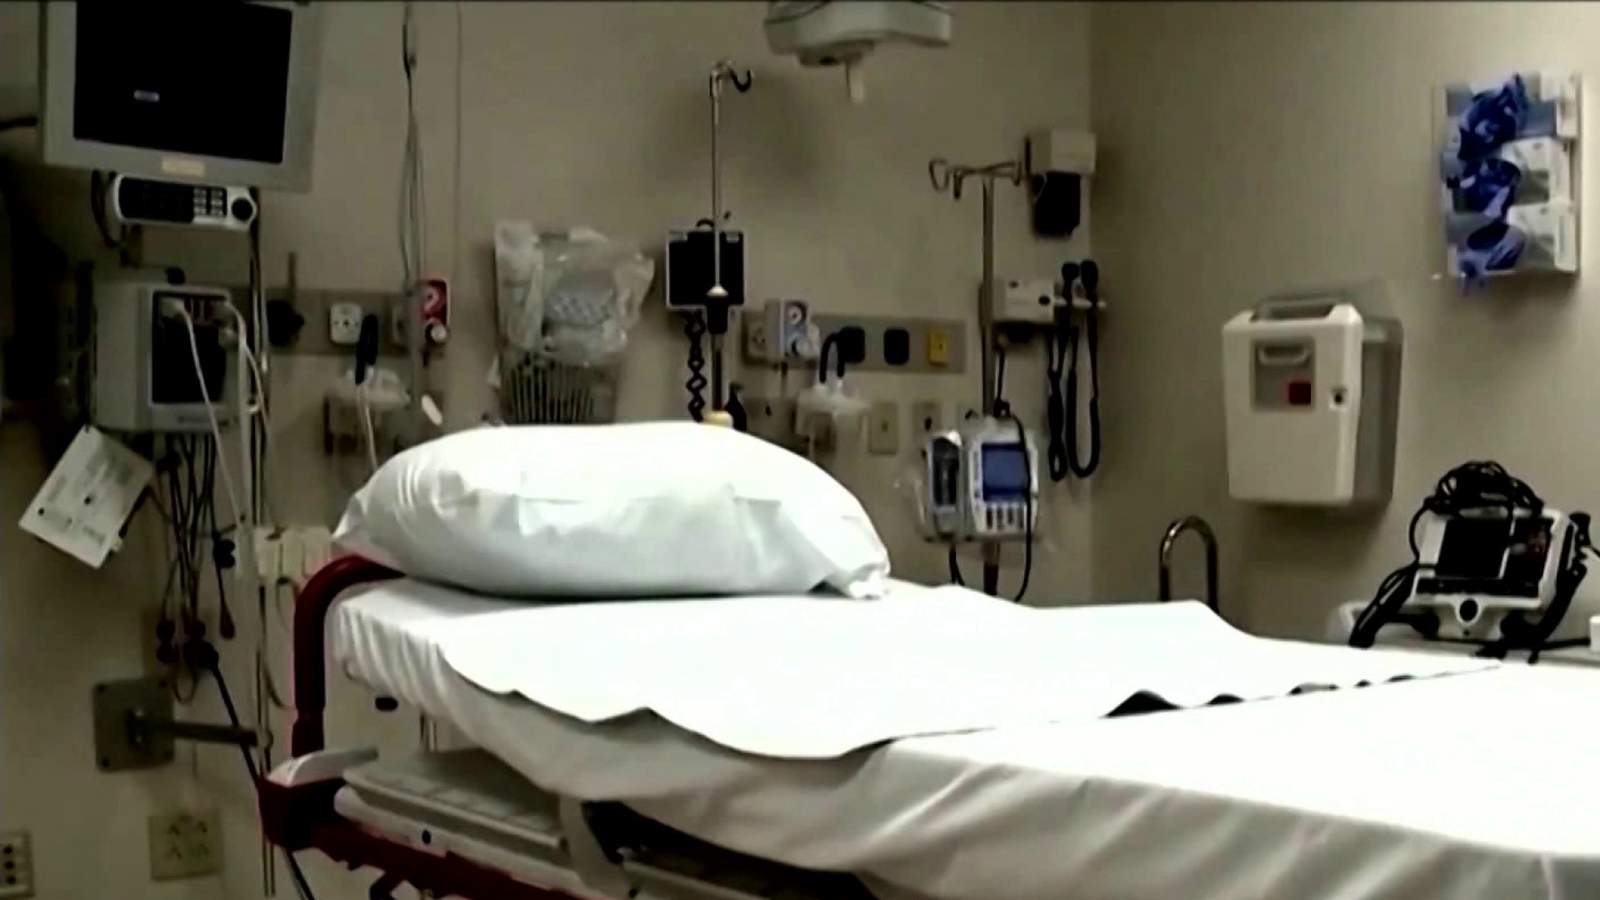 State defends ICU capability, reporting changes